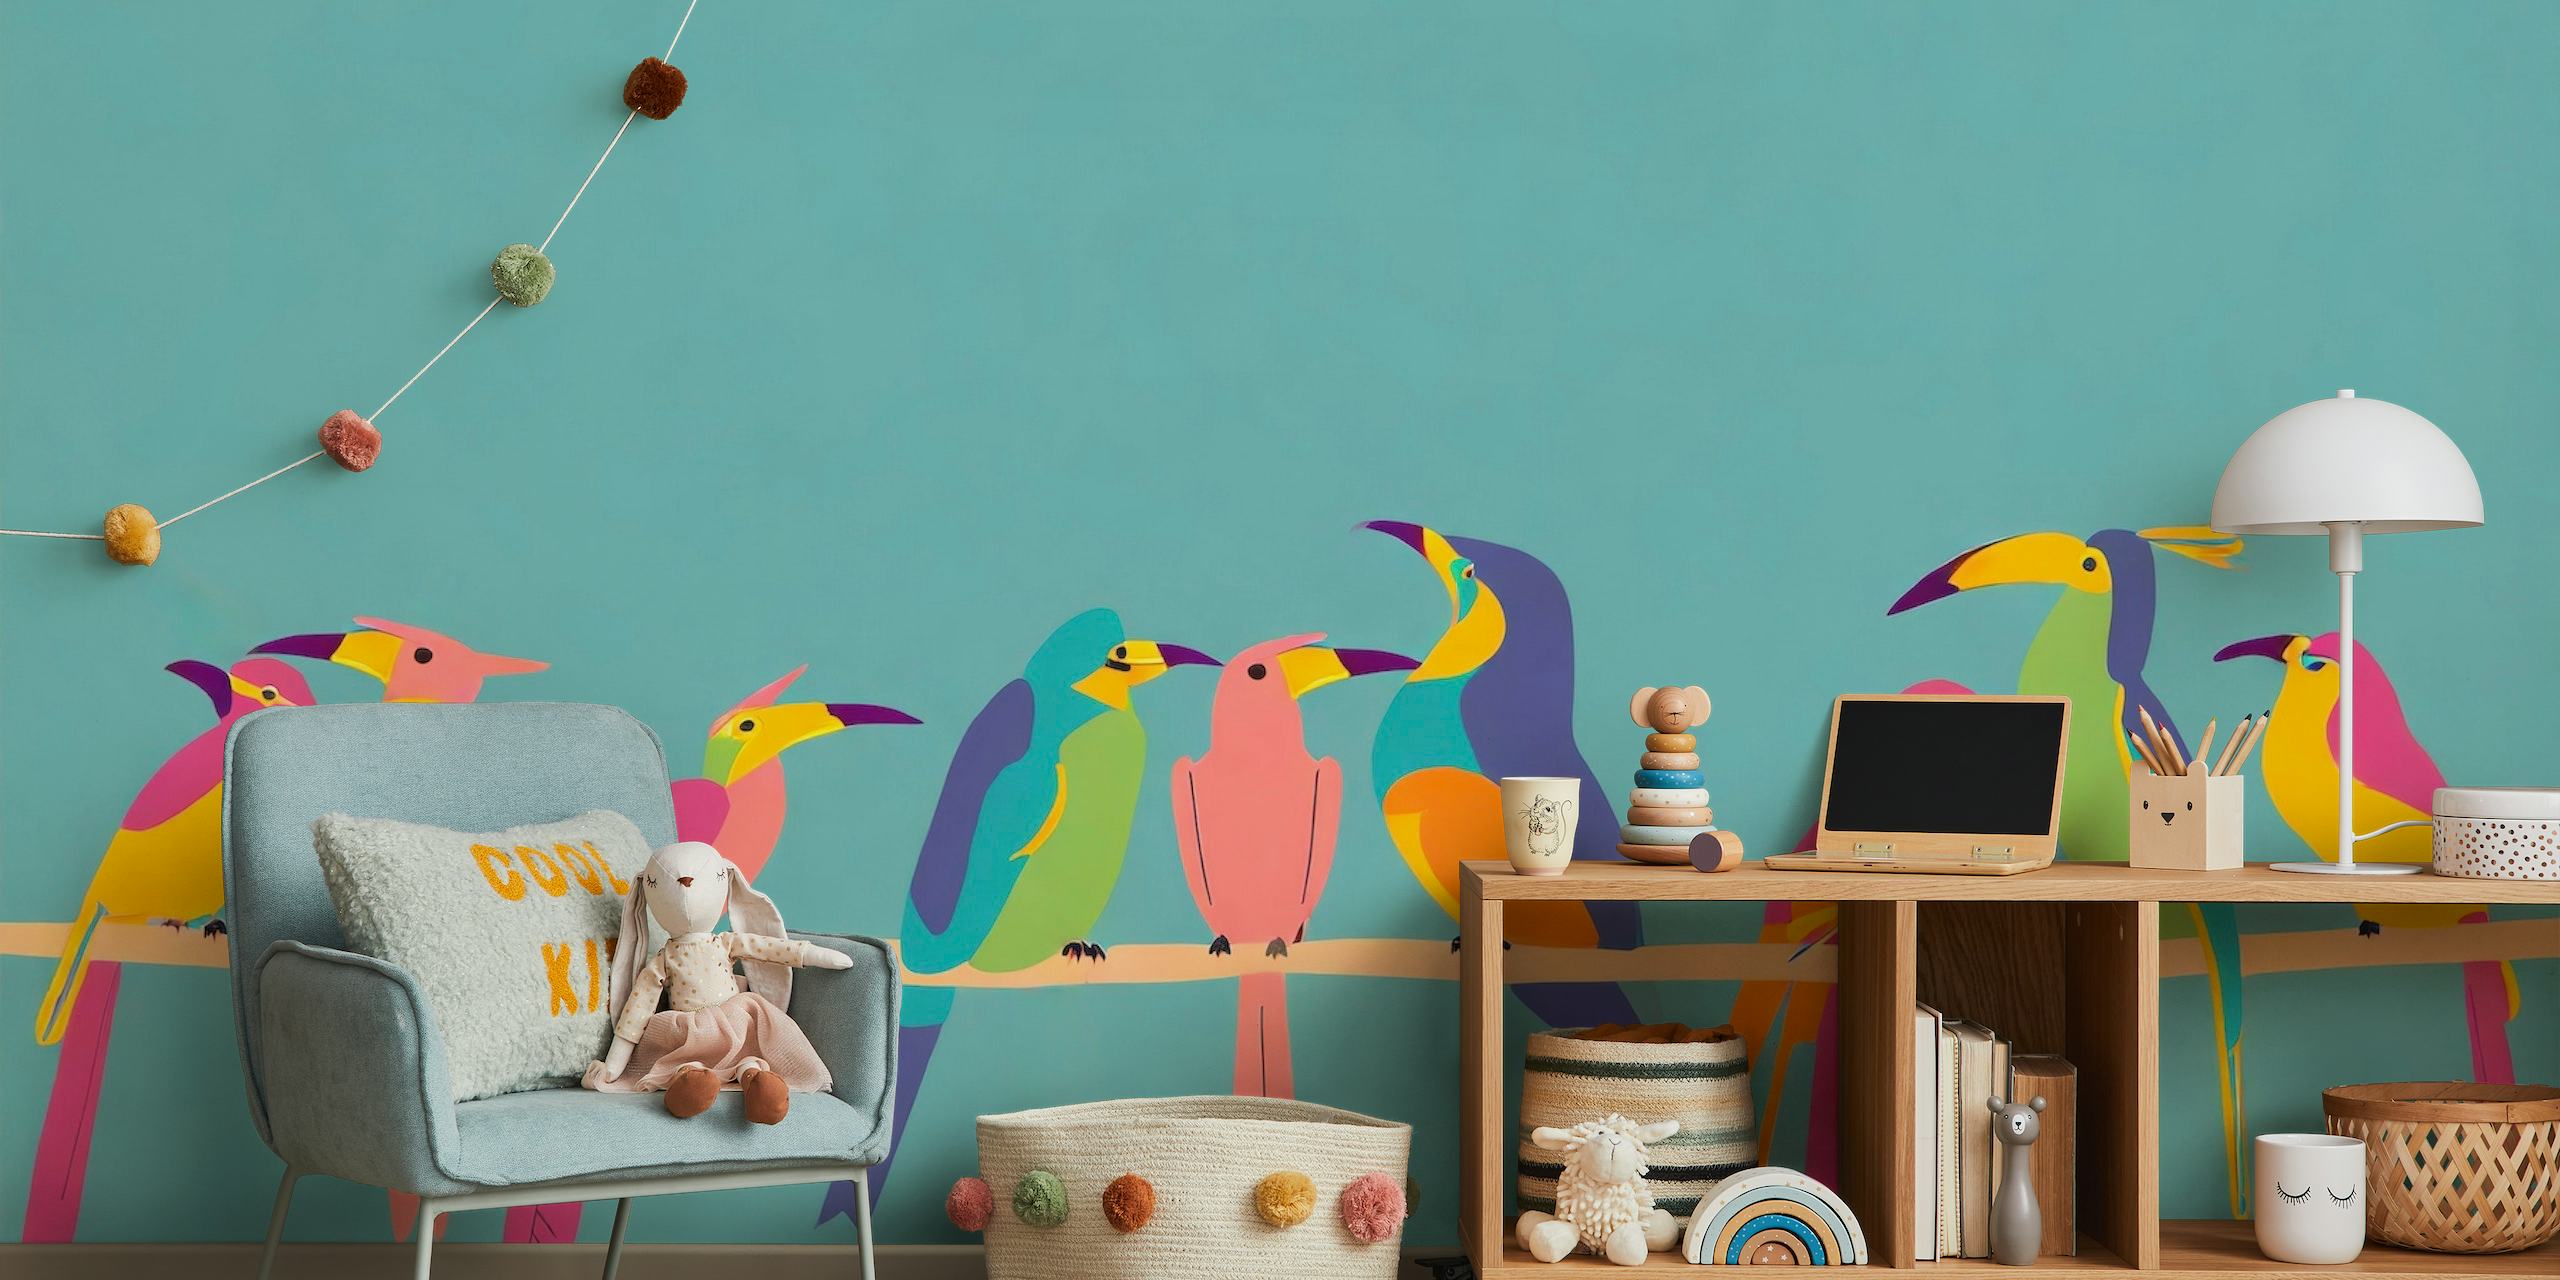 Illustration of stylized colorful birds on a branch against a teal background wall mural